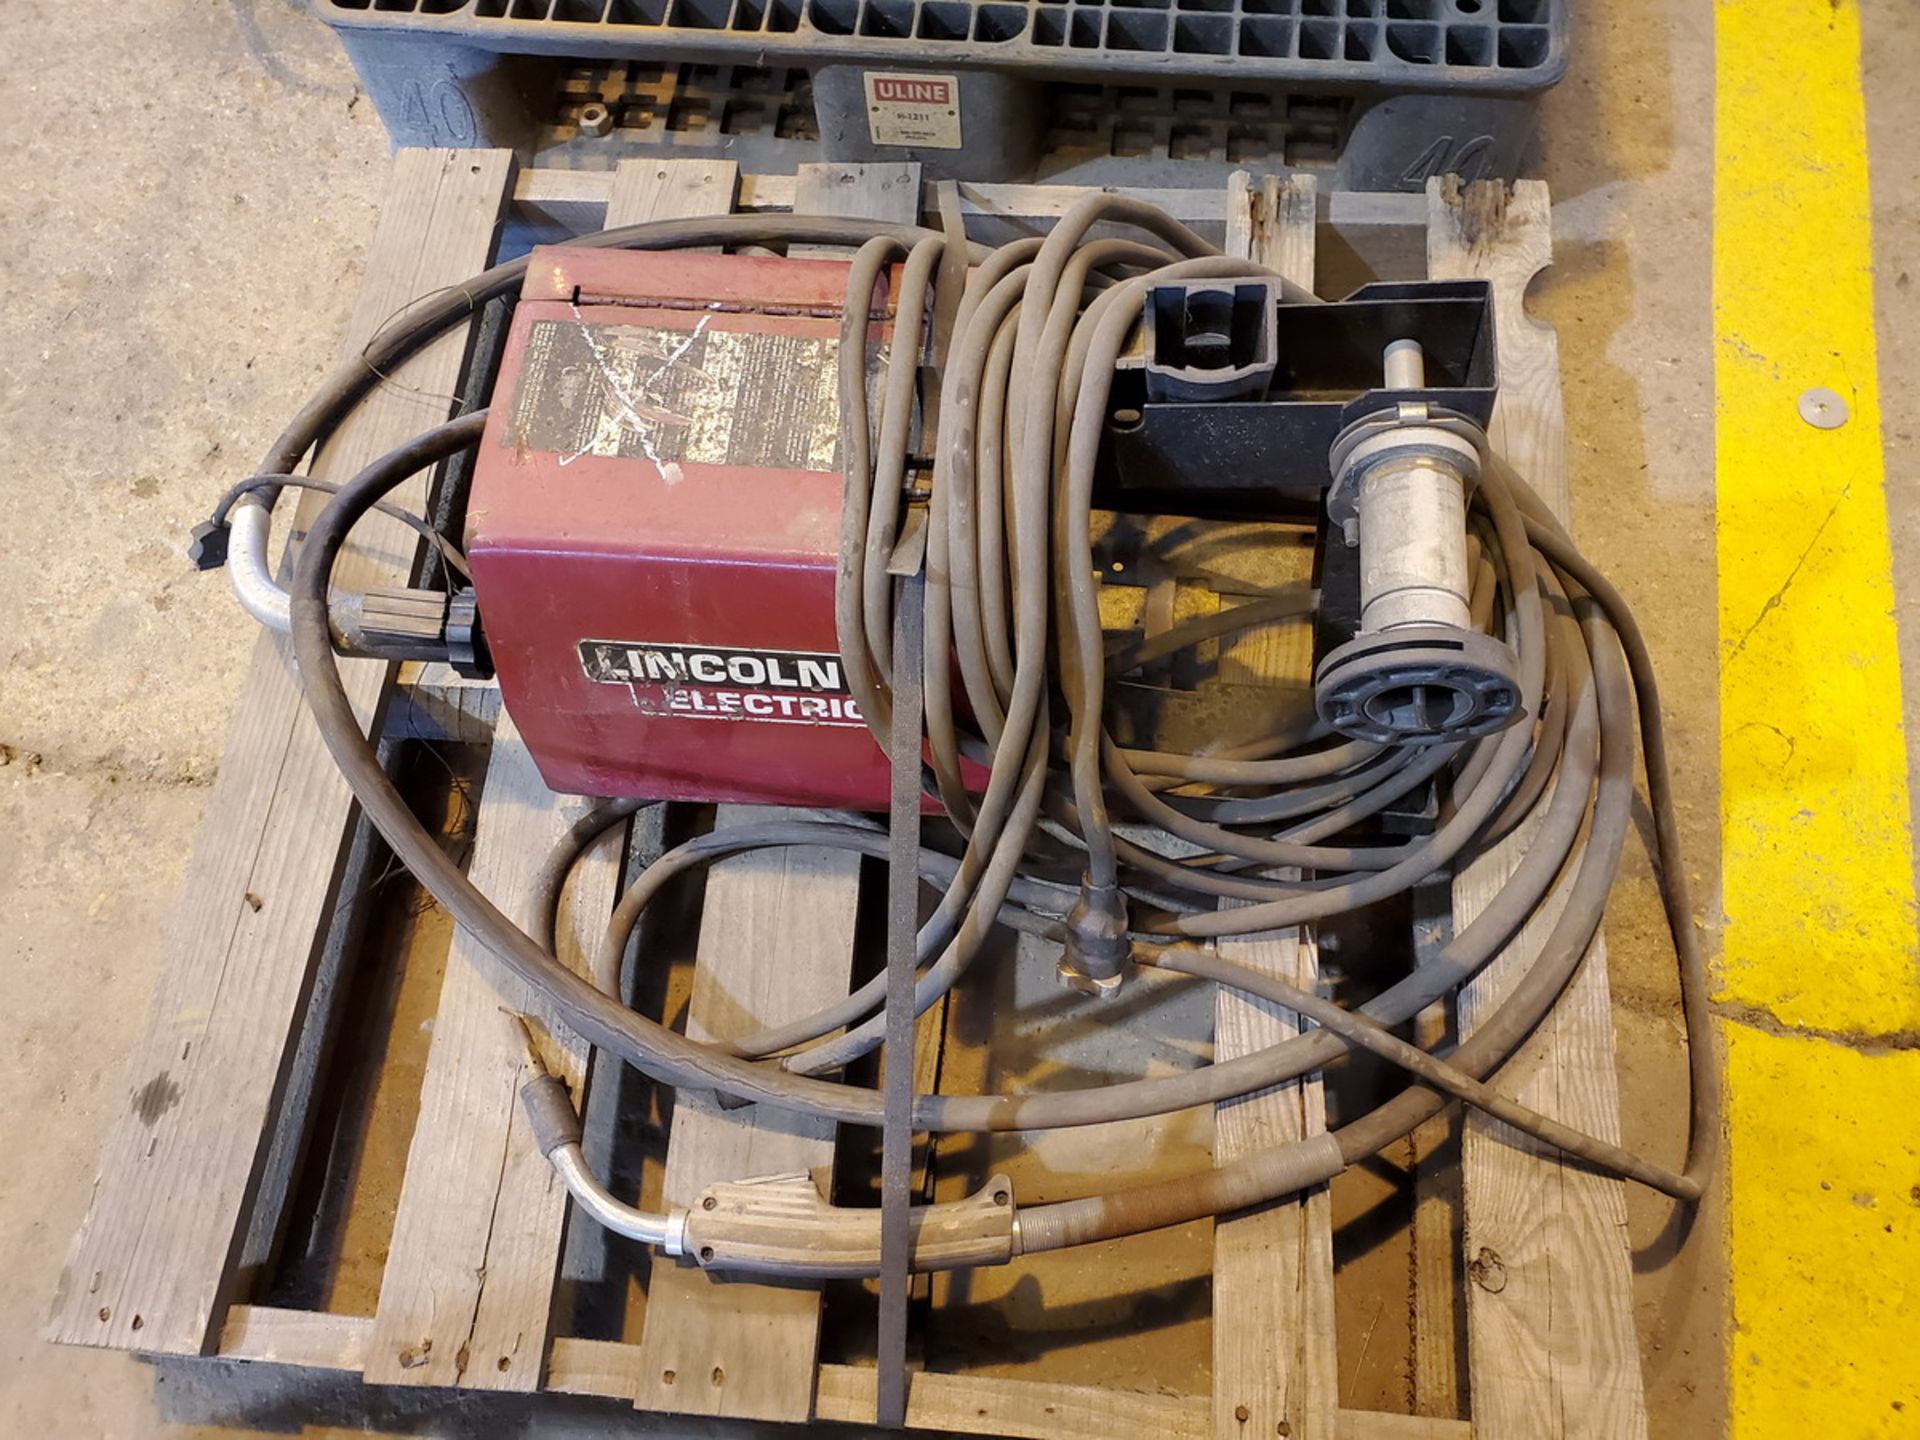 Lincoln Electric Idealarc DC 400 Multiprocessing Welder W/ Lincoln Ele LF-72 Feeder - Image 10 of 10